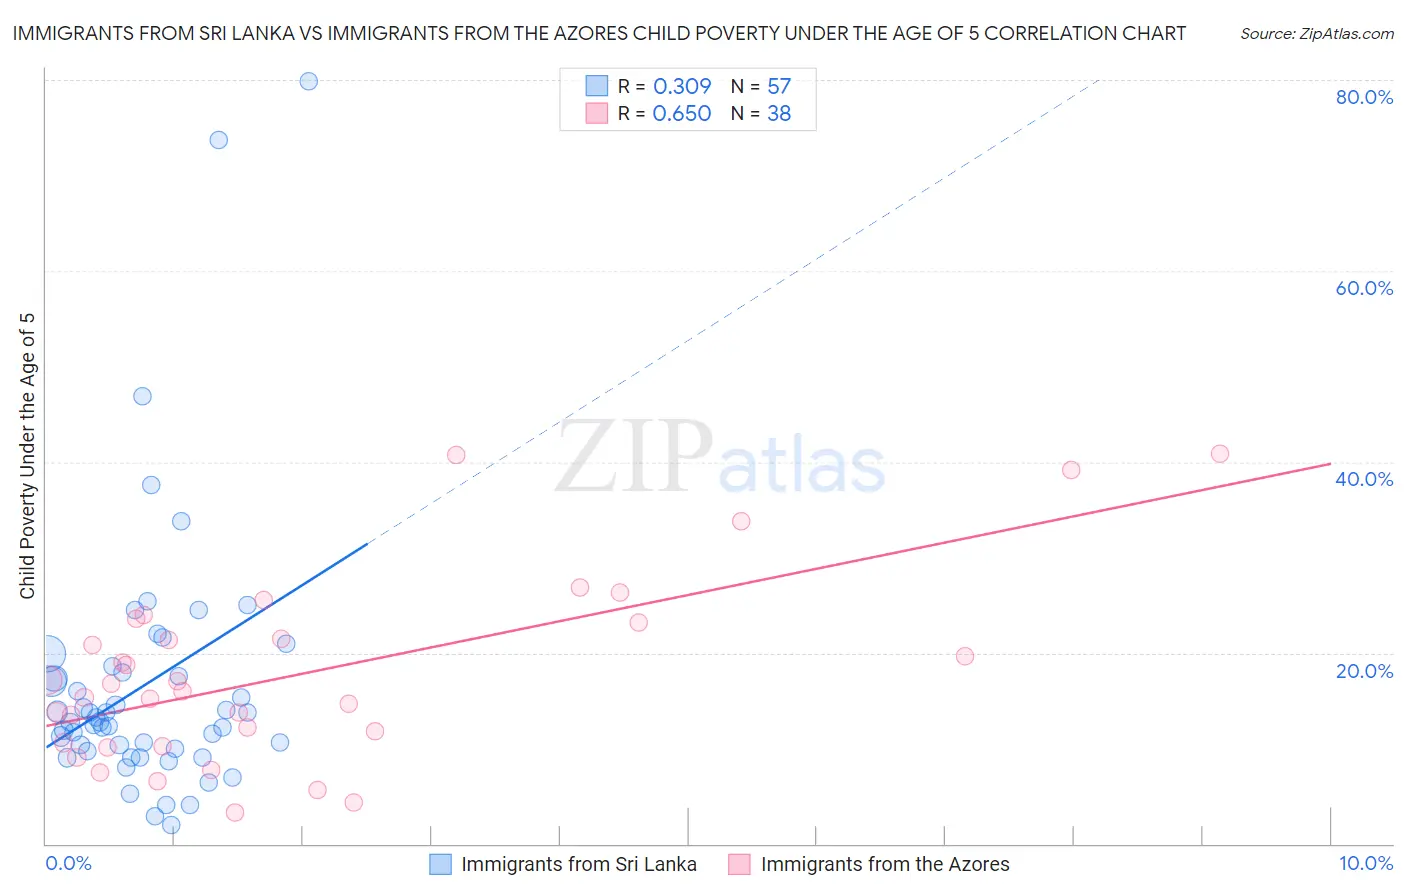 Immigrants from Sri Lanka vs Immigrants from the Azores Child Poverty Under the Age of 5